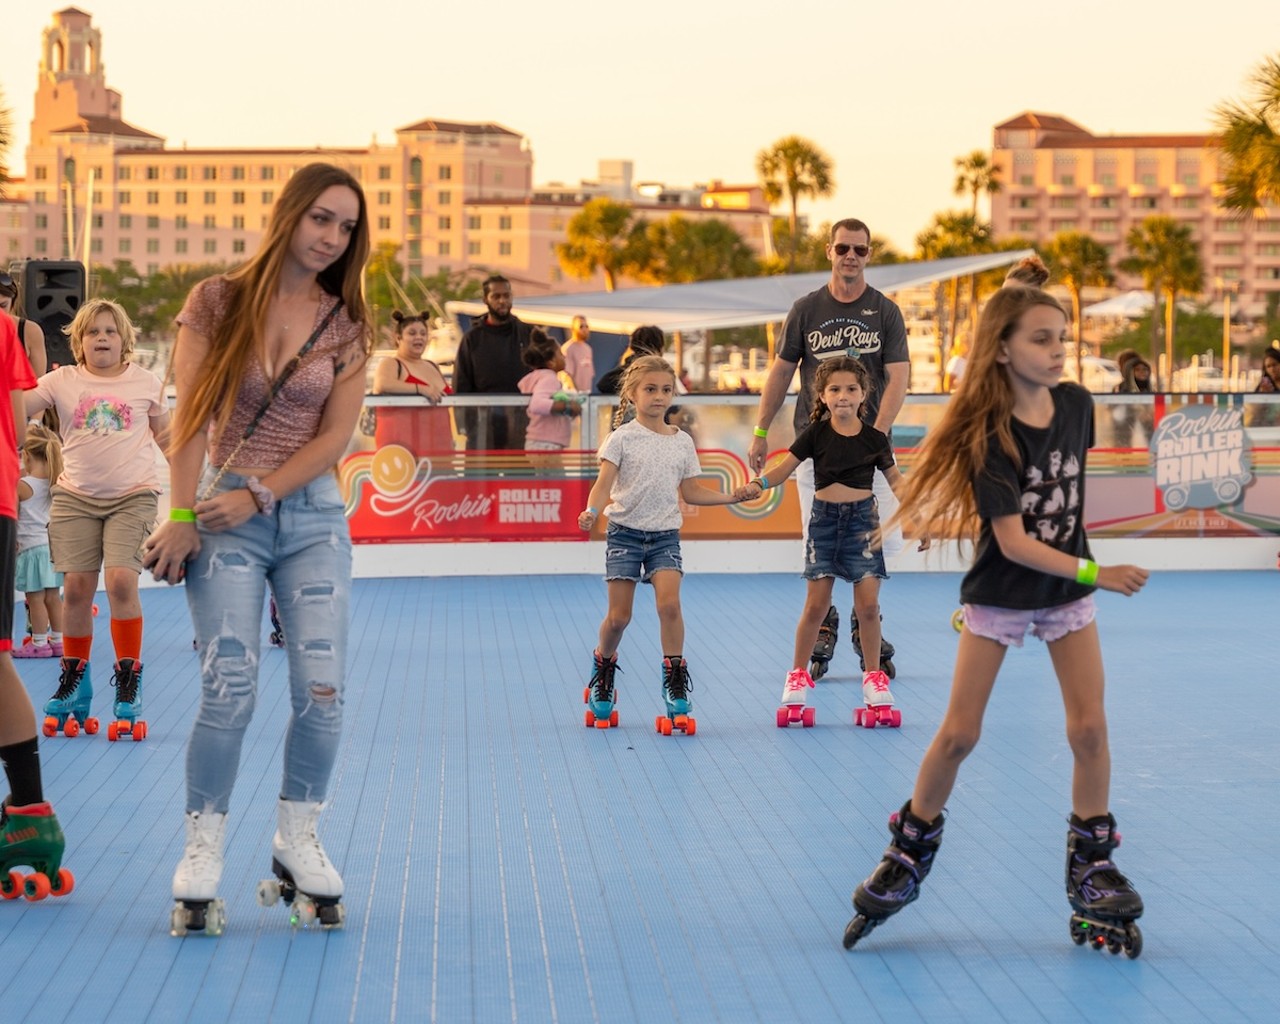 The roller skating rink at the St. Pete Pier reopens in March